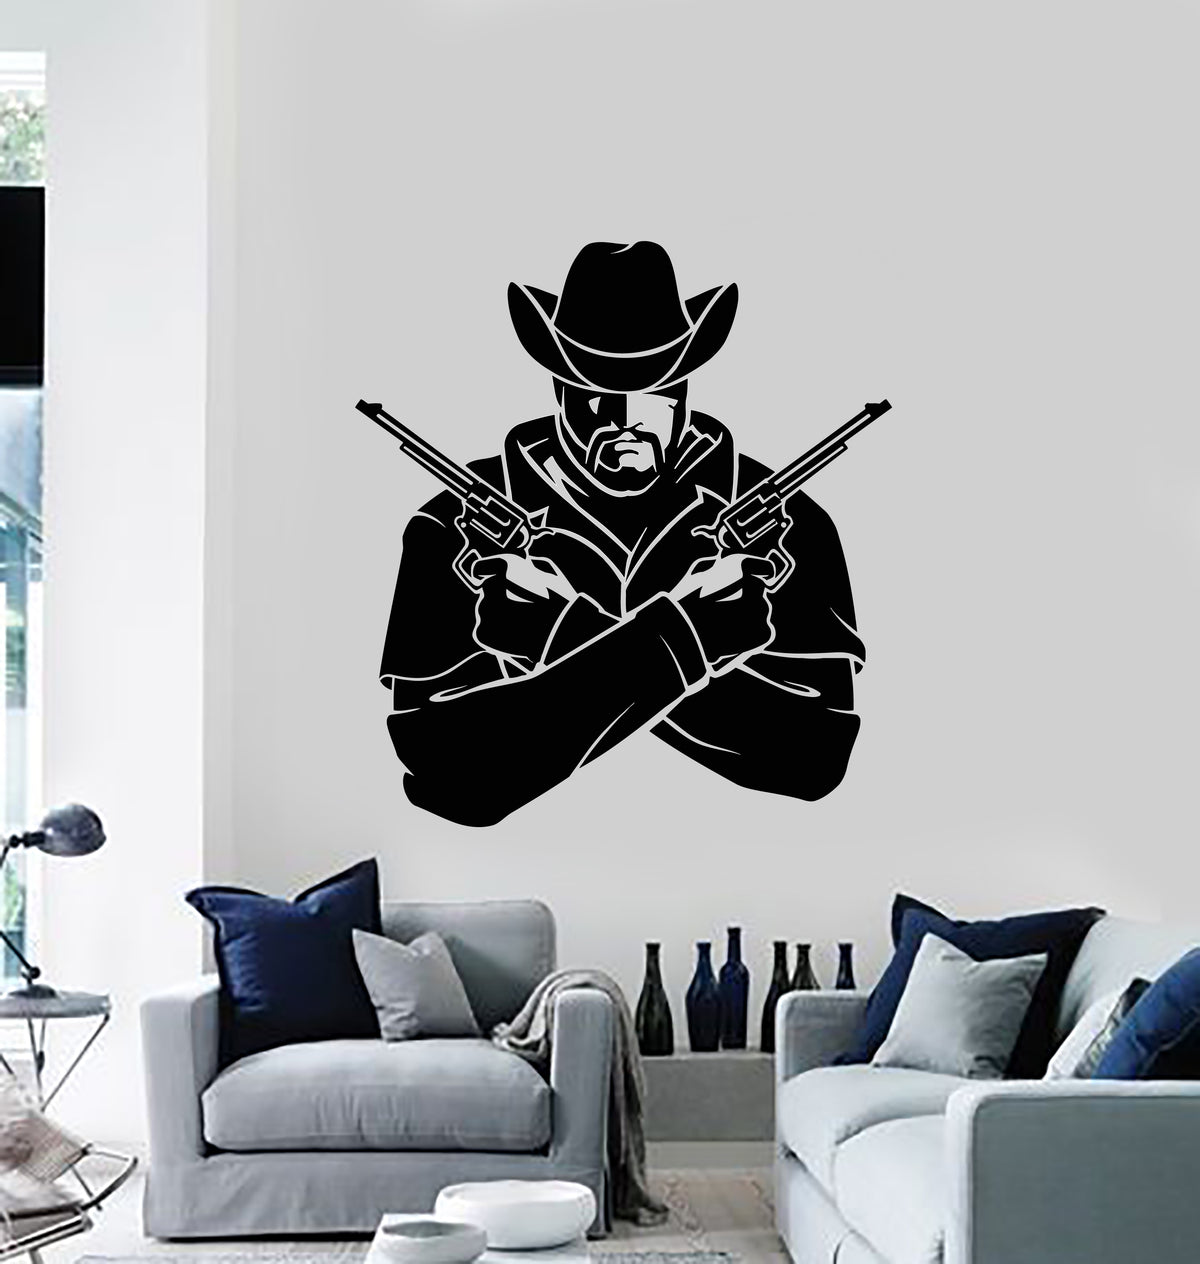 Wall Sticker Cowboy Wanted Texas Wild West Robber Outlaw Decor For Bedroom  z1507